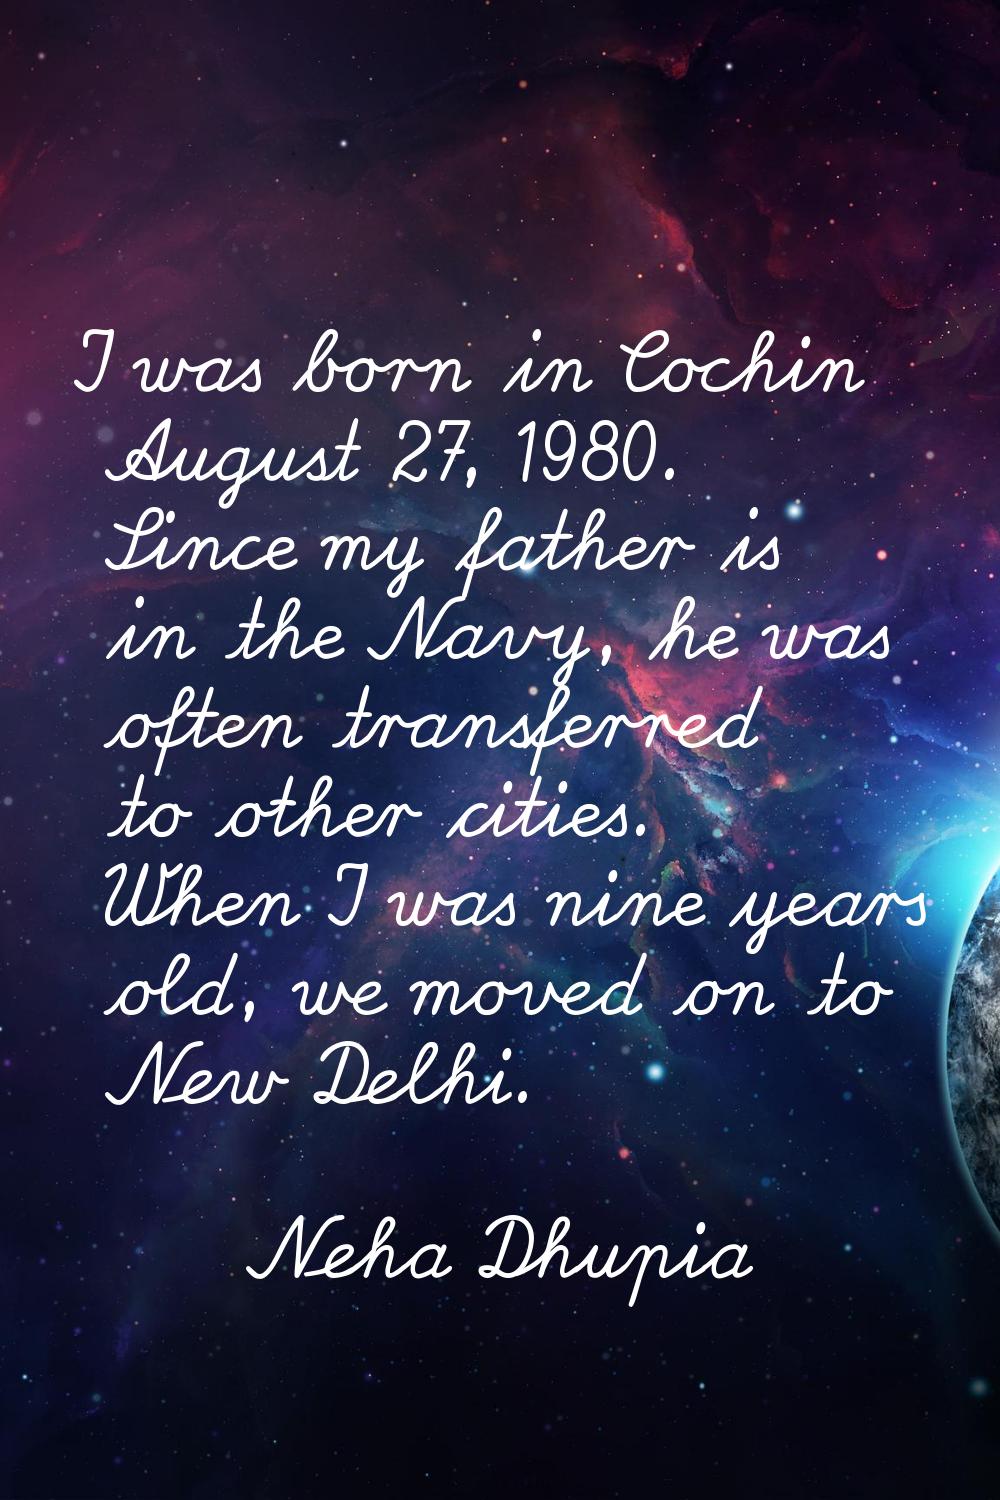 I was born in Cochin August 27, 1980. Since my father is in the Navy, he was often transferred to o